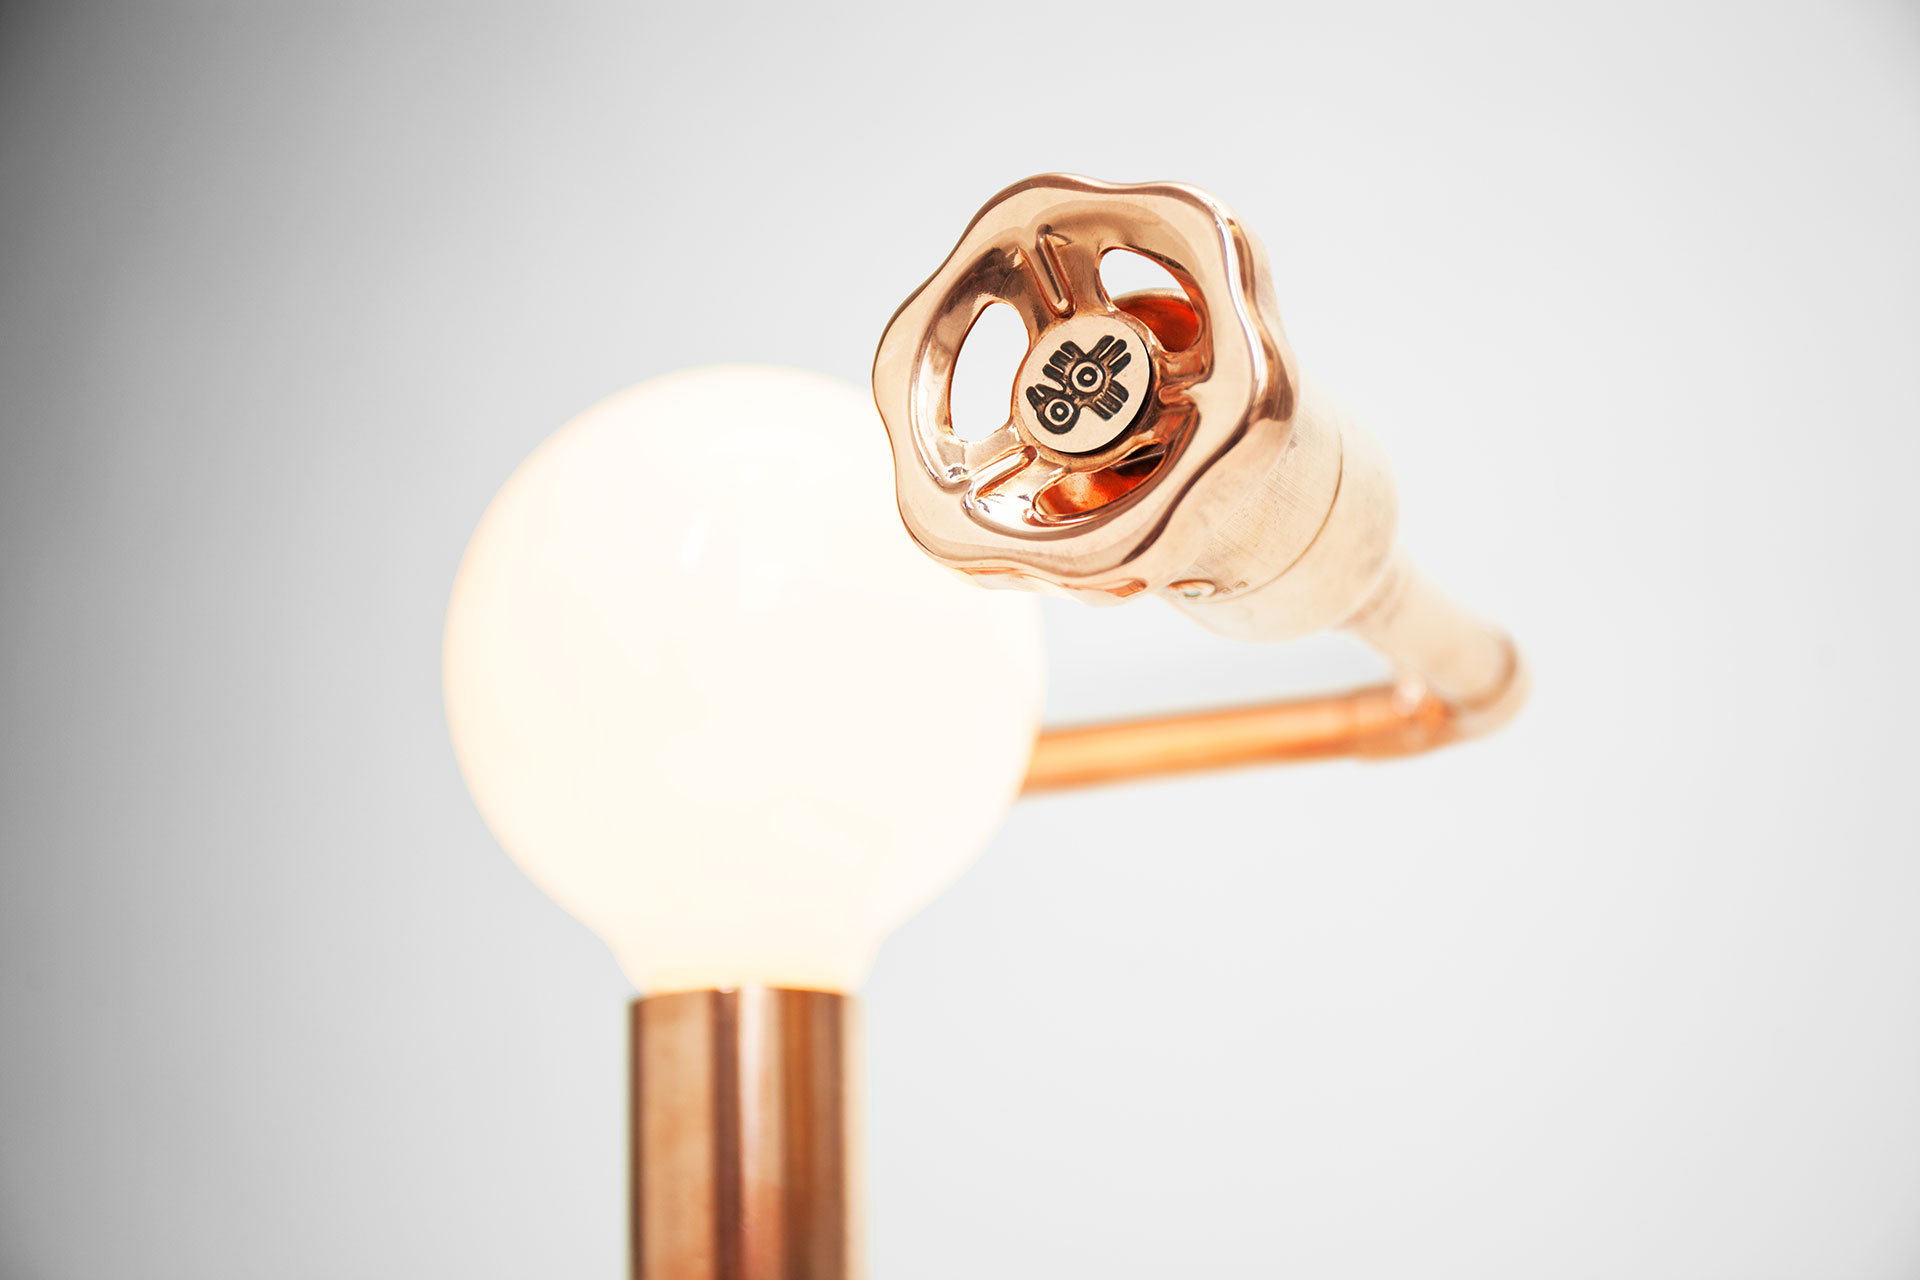 Designer lighting made of trendy copper with creative knob dimmer